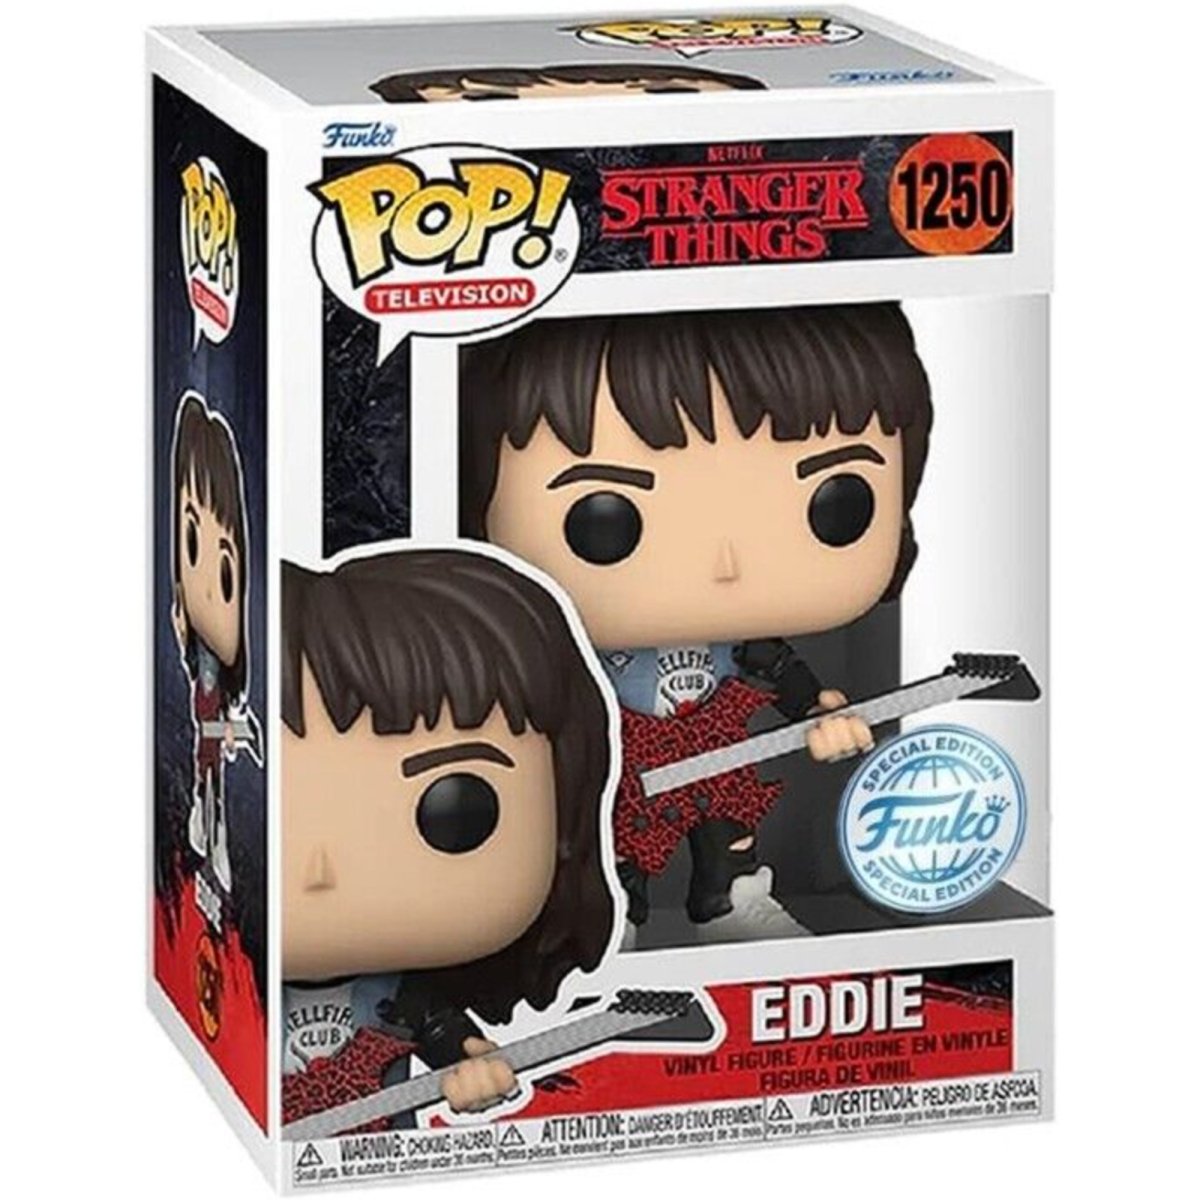 Stranger Things - Eddie [with Guitar] (Special Edition) #1250 - Funko Pop! Vinyl Television - Persona Toys